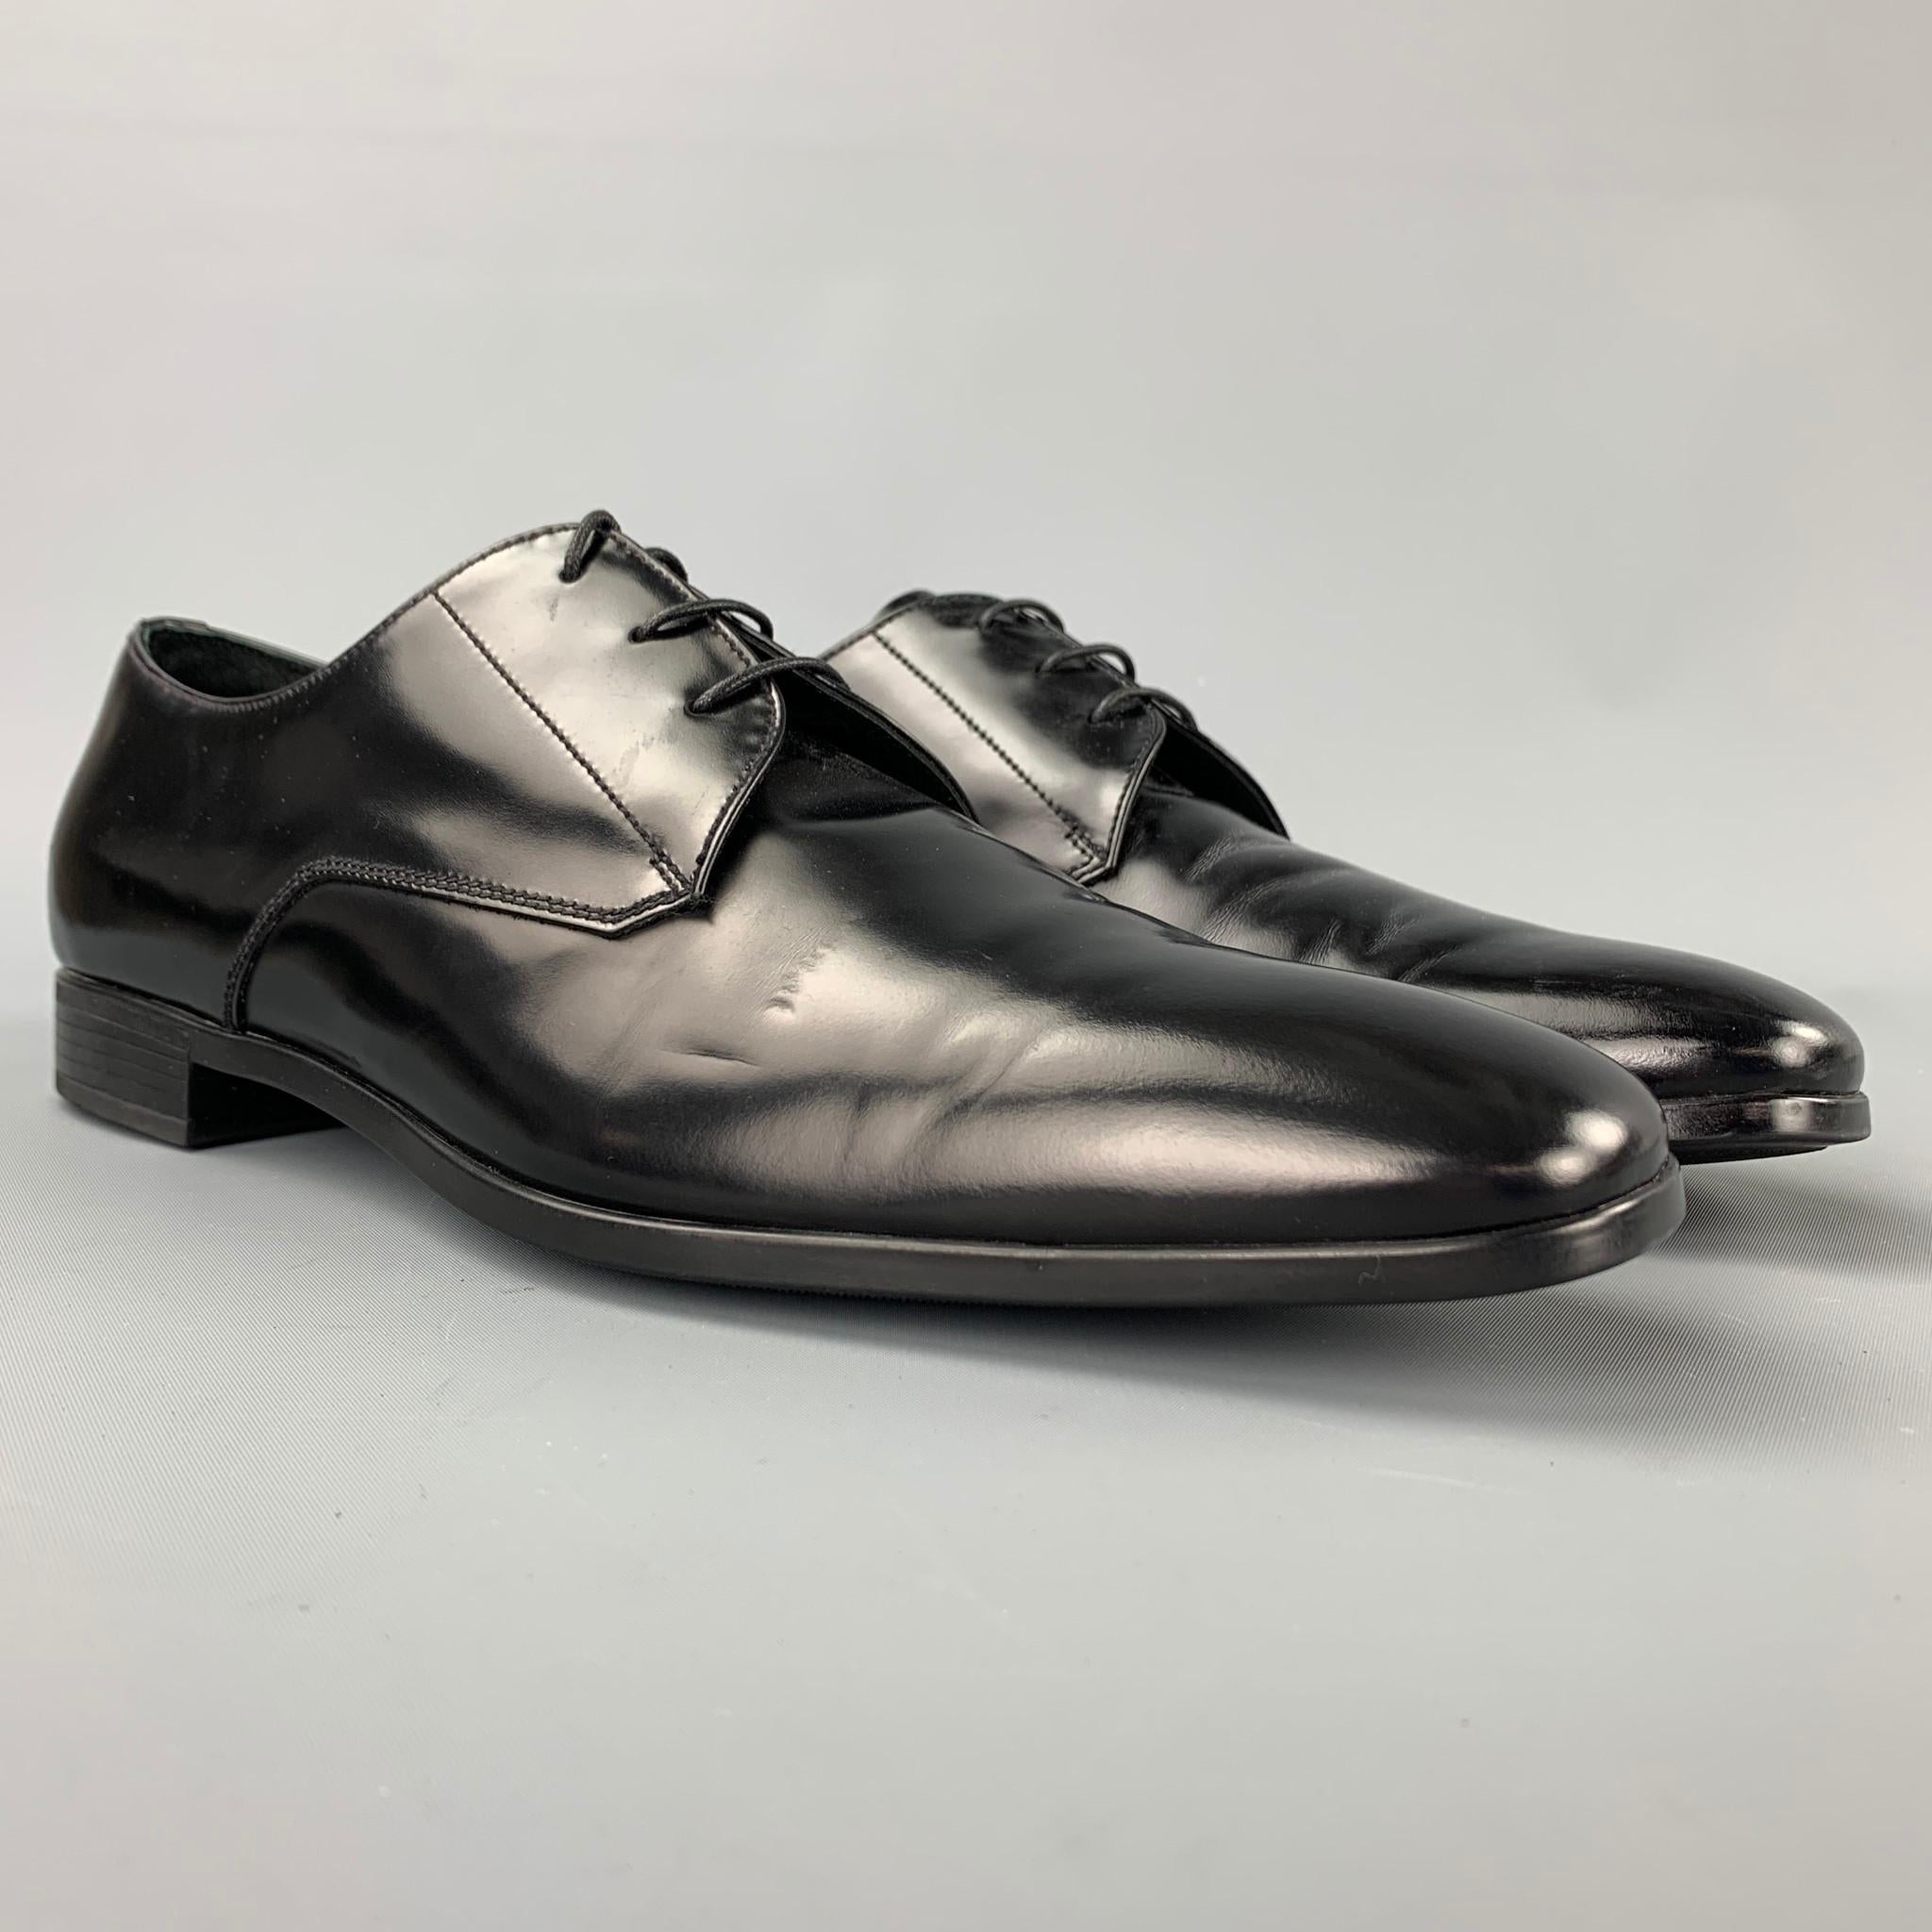 PRADA dress shoes comes in a black leather featuring a square toe, rubber sole, and a lace up closure. Made in Italy.

Very Good Pre-Owned Condition.
Marked: 2EC 071 9

Outsole: 12 in. x 4 in. 